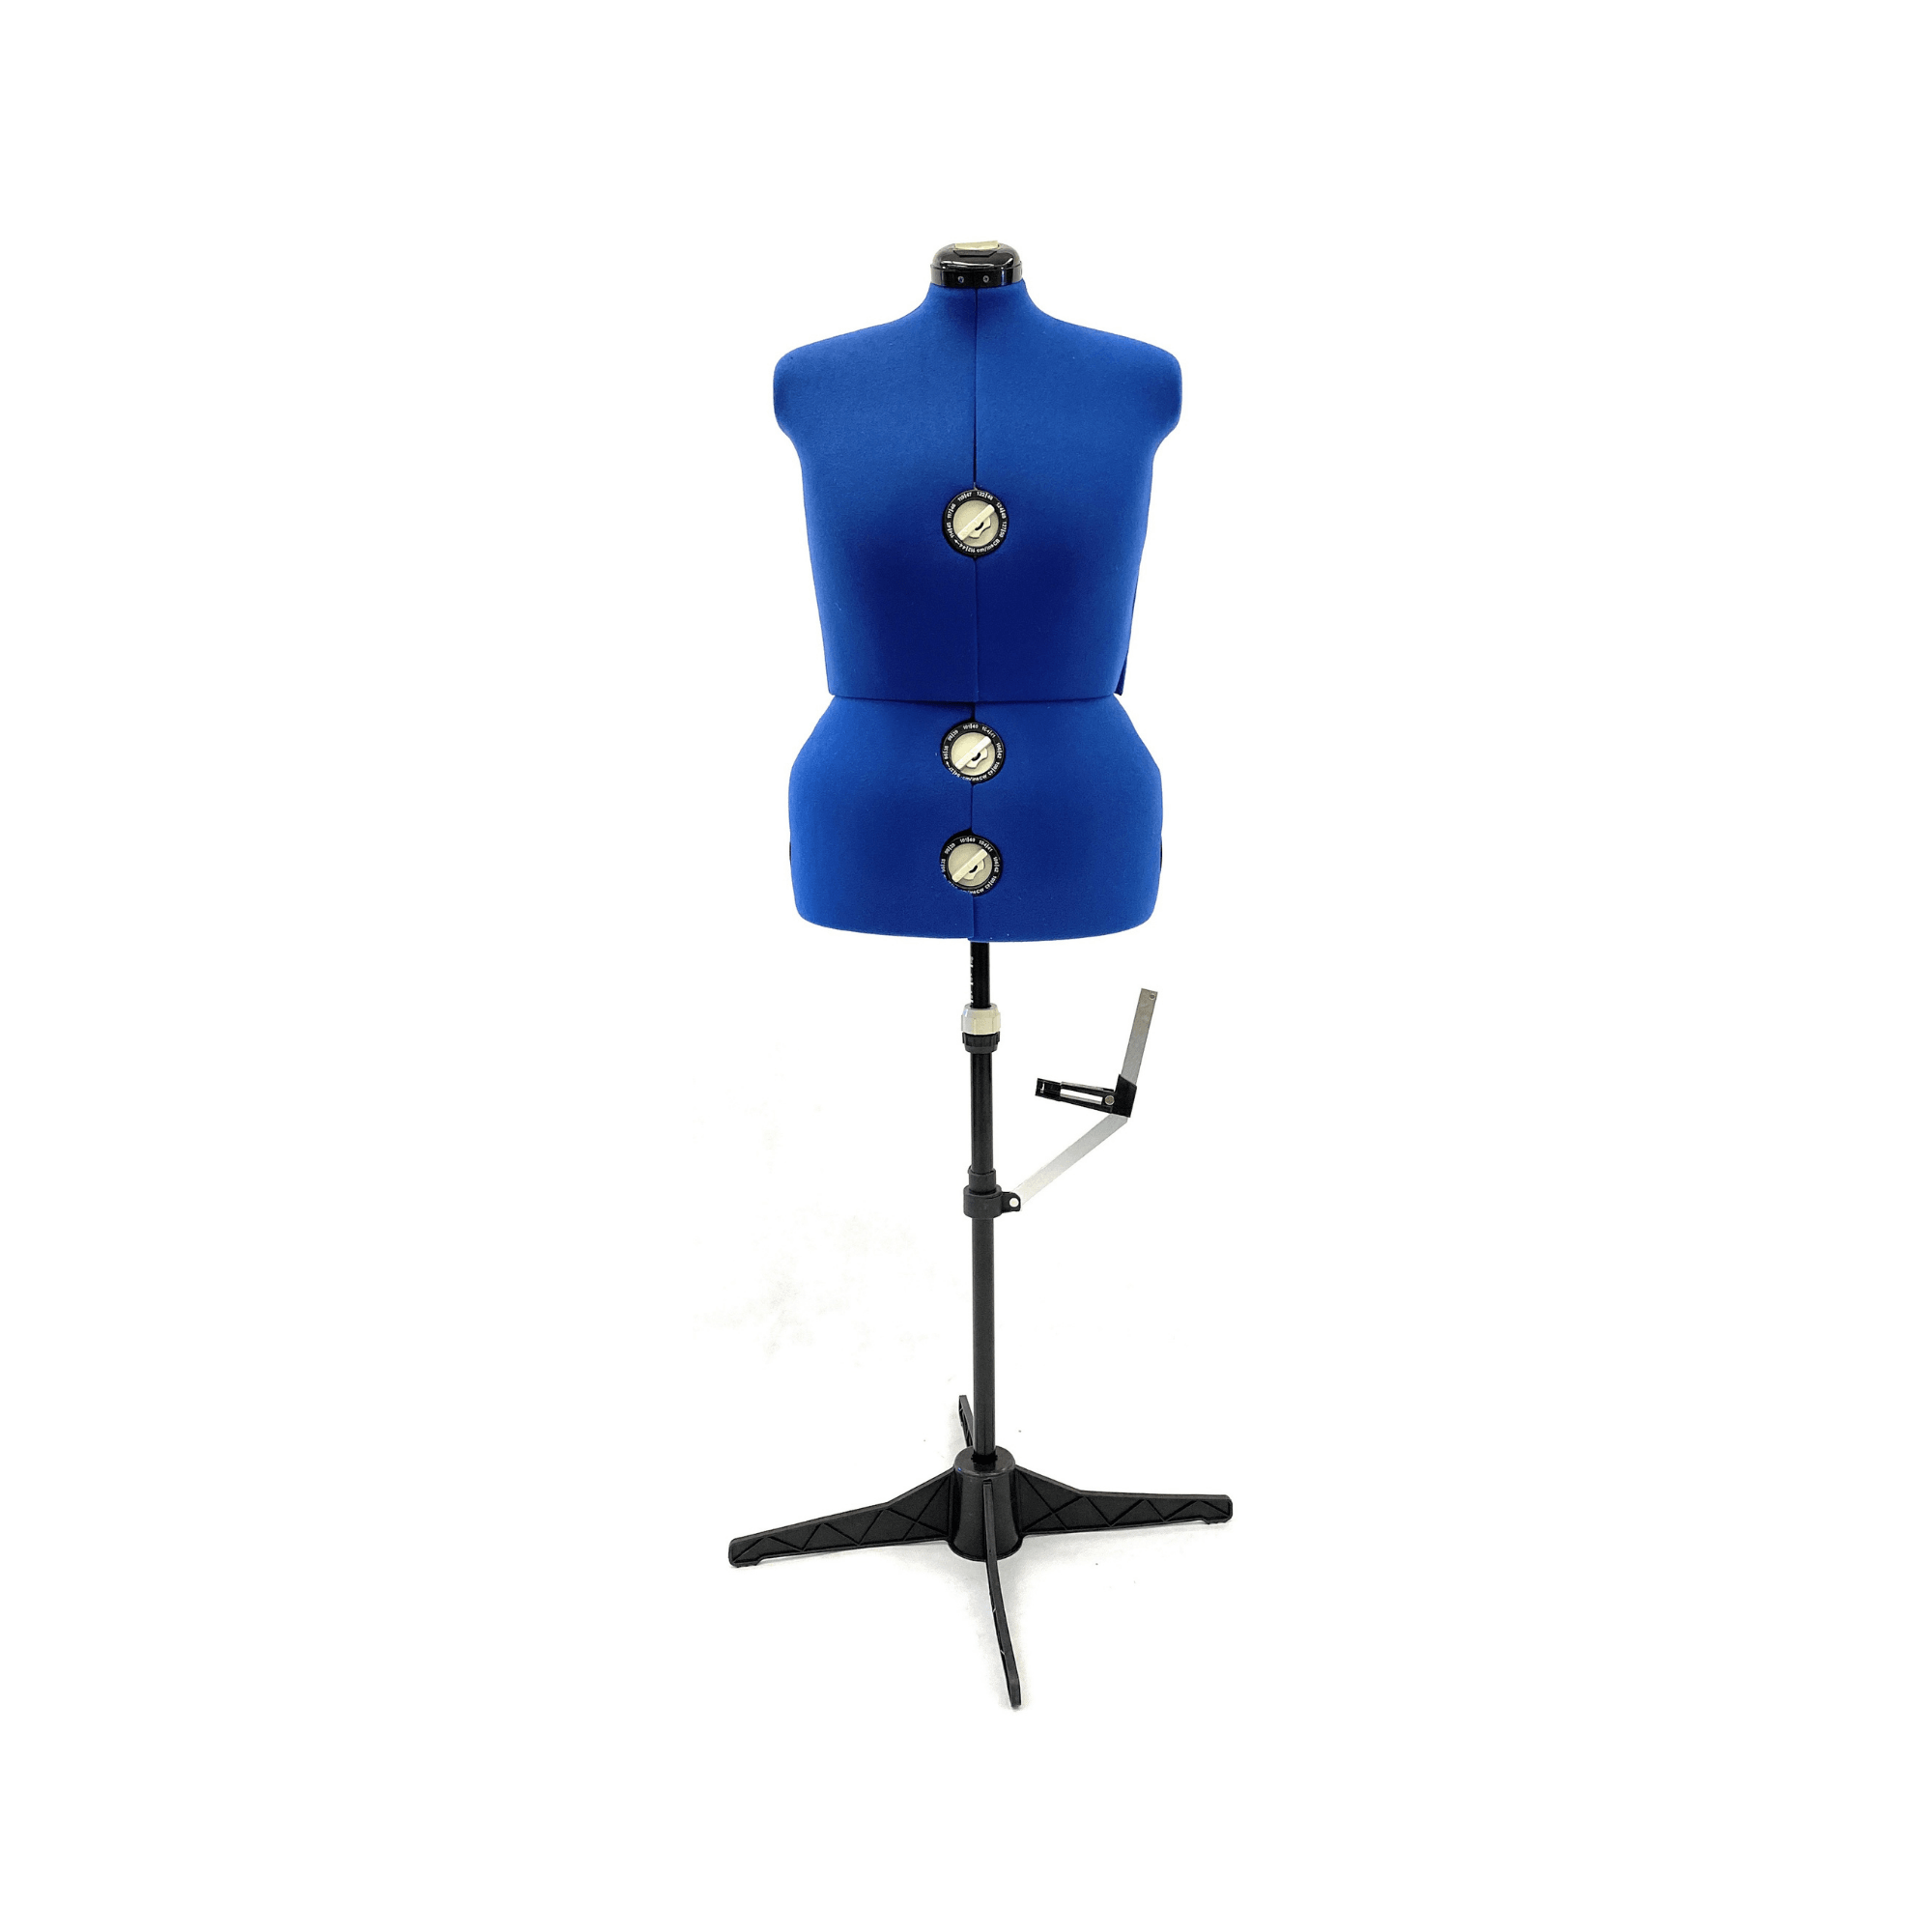  Dress Mannequin with Stand for Sewing, Adjustable Detachable  Child Mannequin Body, Manikin Display Stand for Clothes Display ( Size : 8  Years Old ) : Arts, Crafts & Sewing